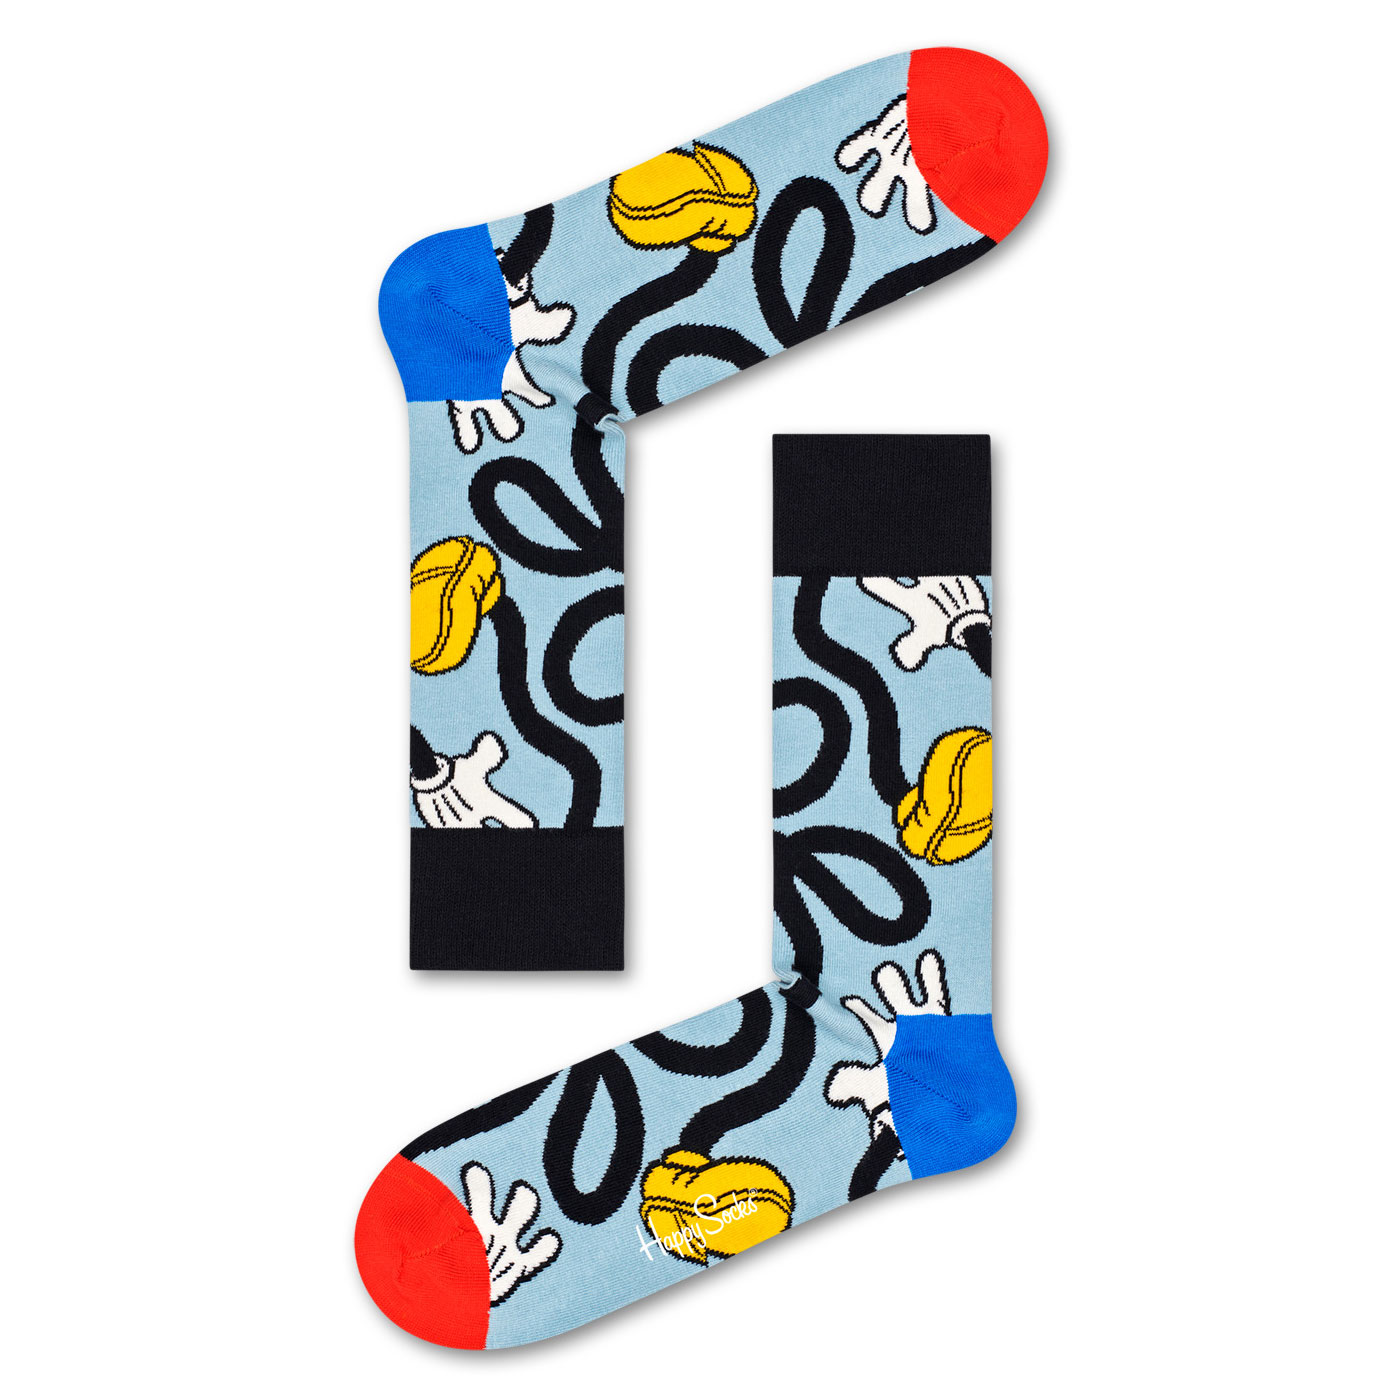 Disney Mickey Stretch Sock(36-40) <img src="/banner_images/banner_0000000180.gif">